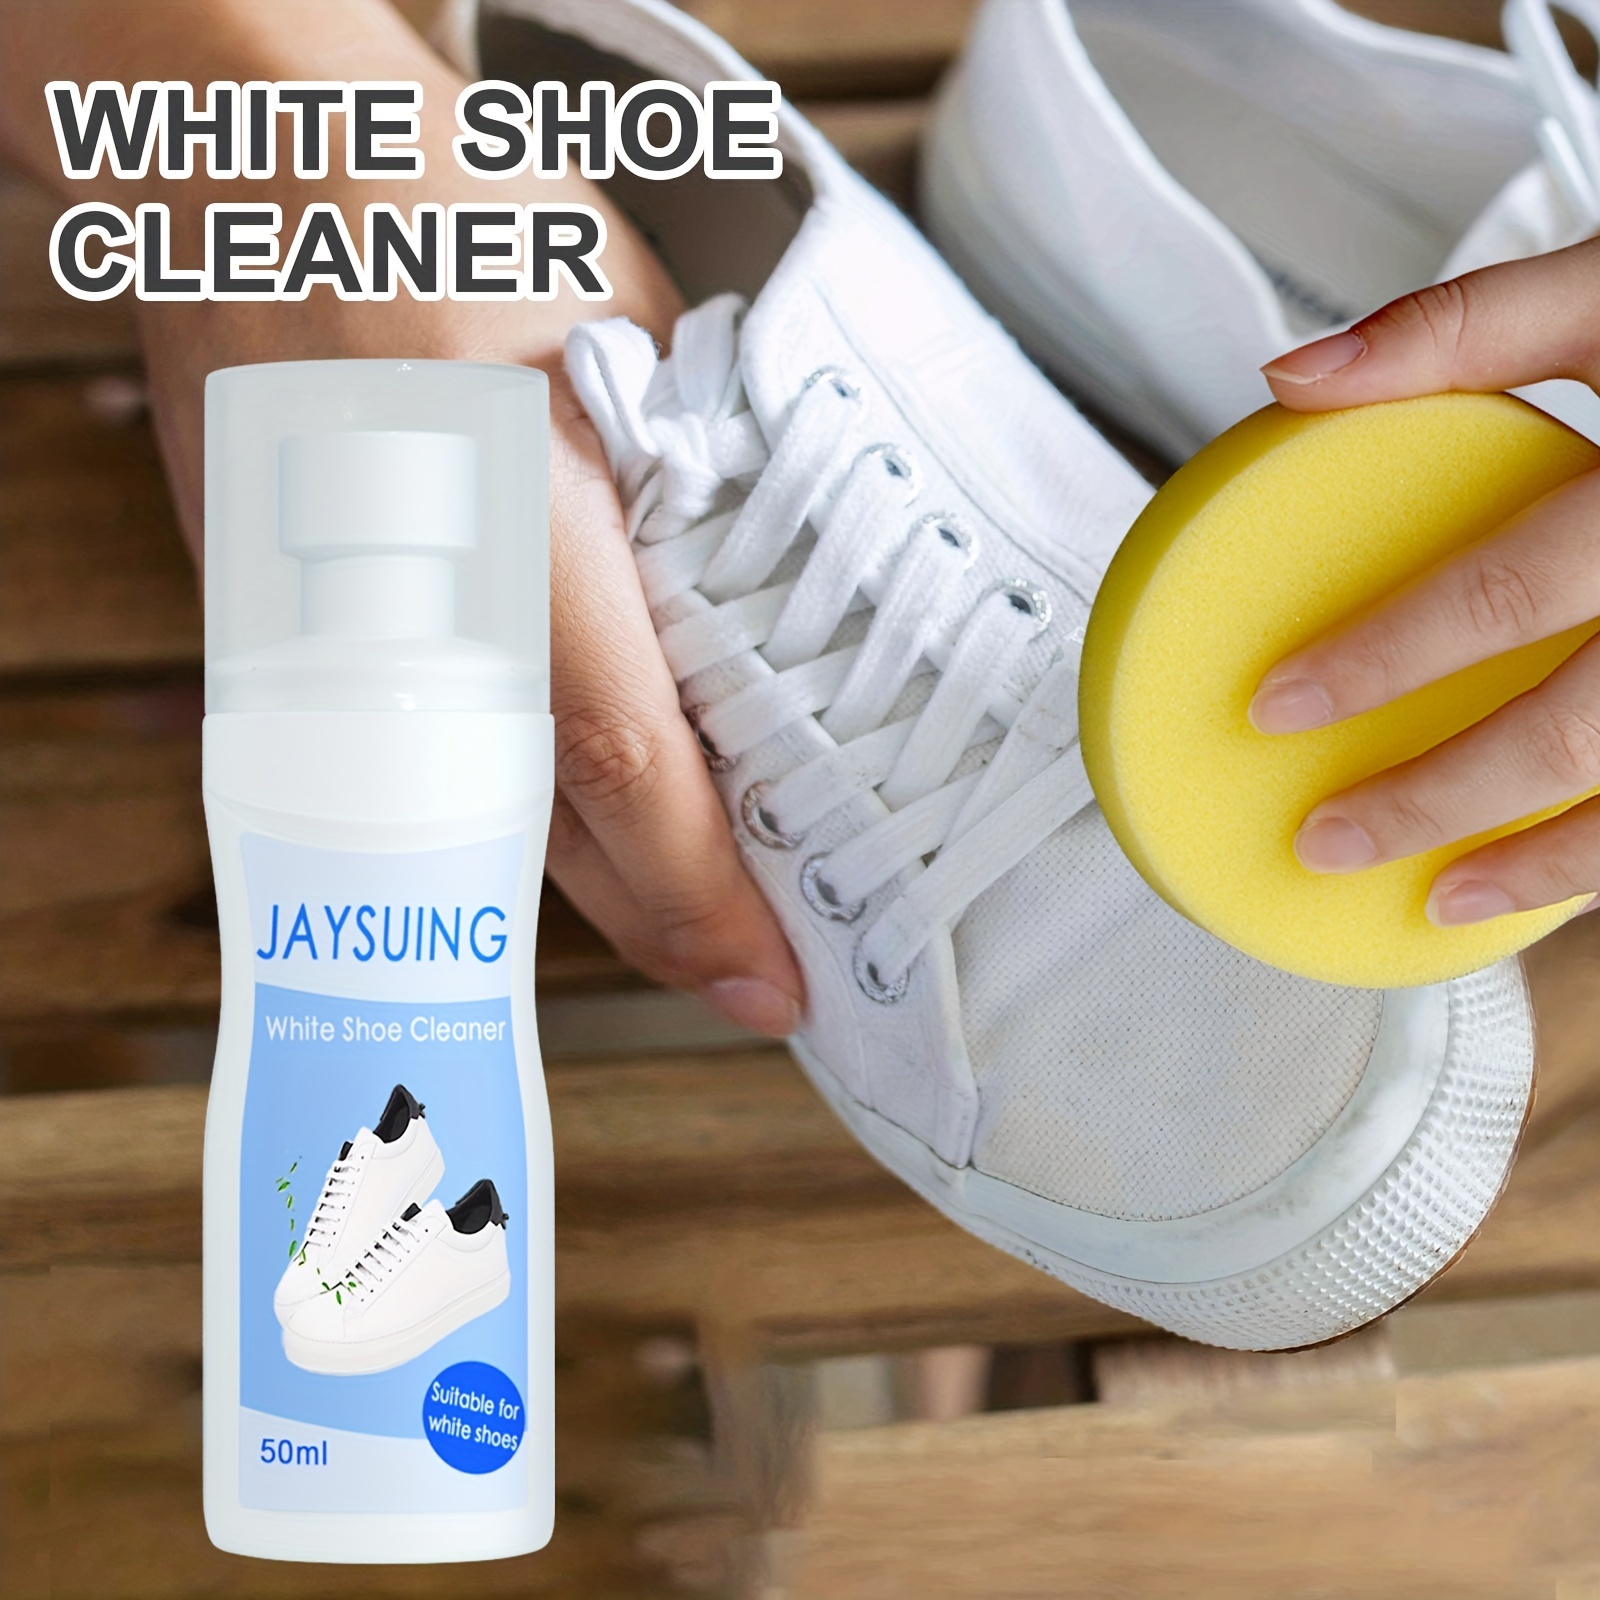 White Shoes Cleaning Whitening Agent Small White Shoe - Temu